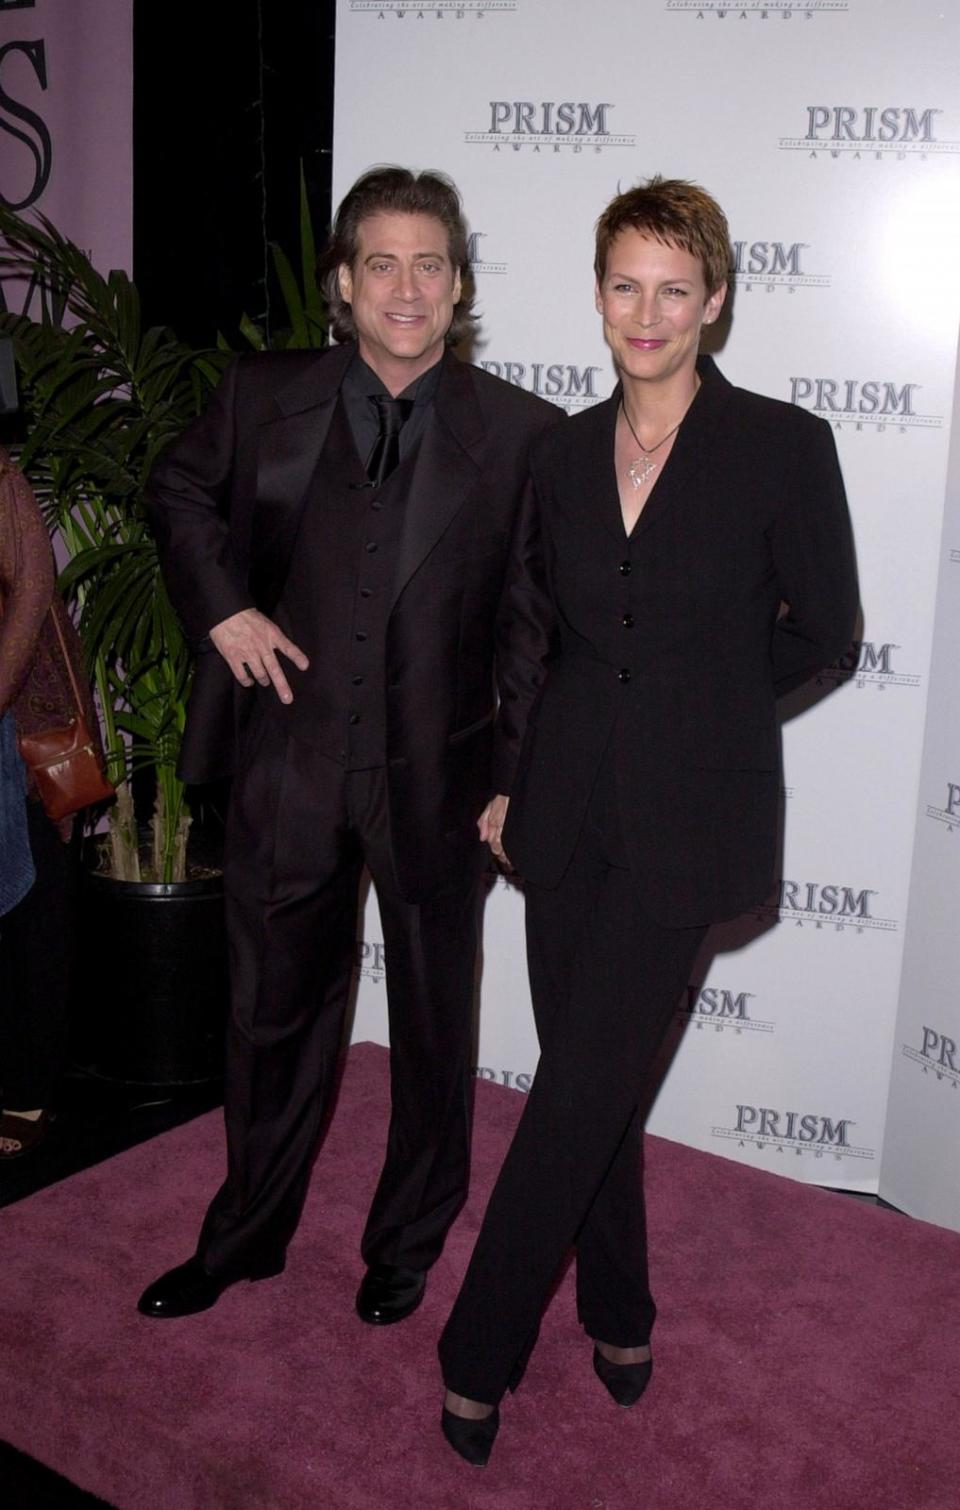 PHOTO: In this April 4, 2001, file photo, Jamie Lee Curtis & Richard Lewis attend the 5th Annual Prism Awards at CBS Television City in Los Angeles. (J. P. Aussenard/WireImage via Getty Images, FILE)